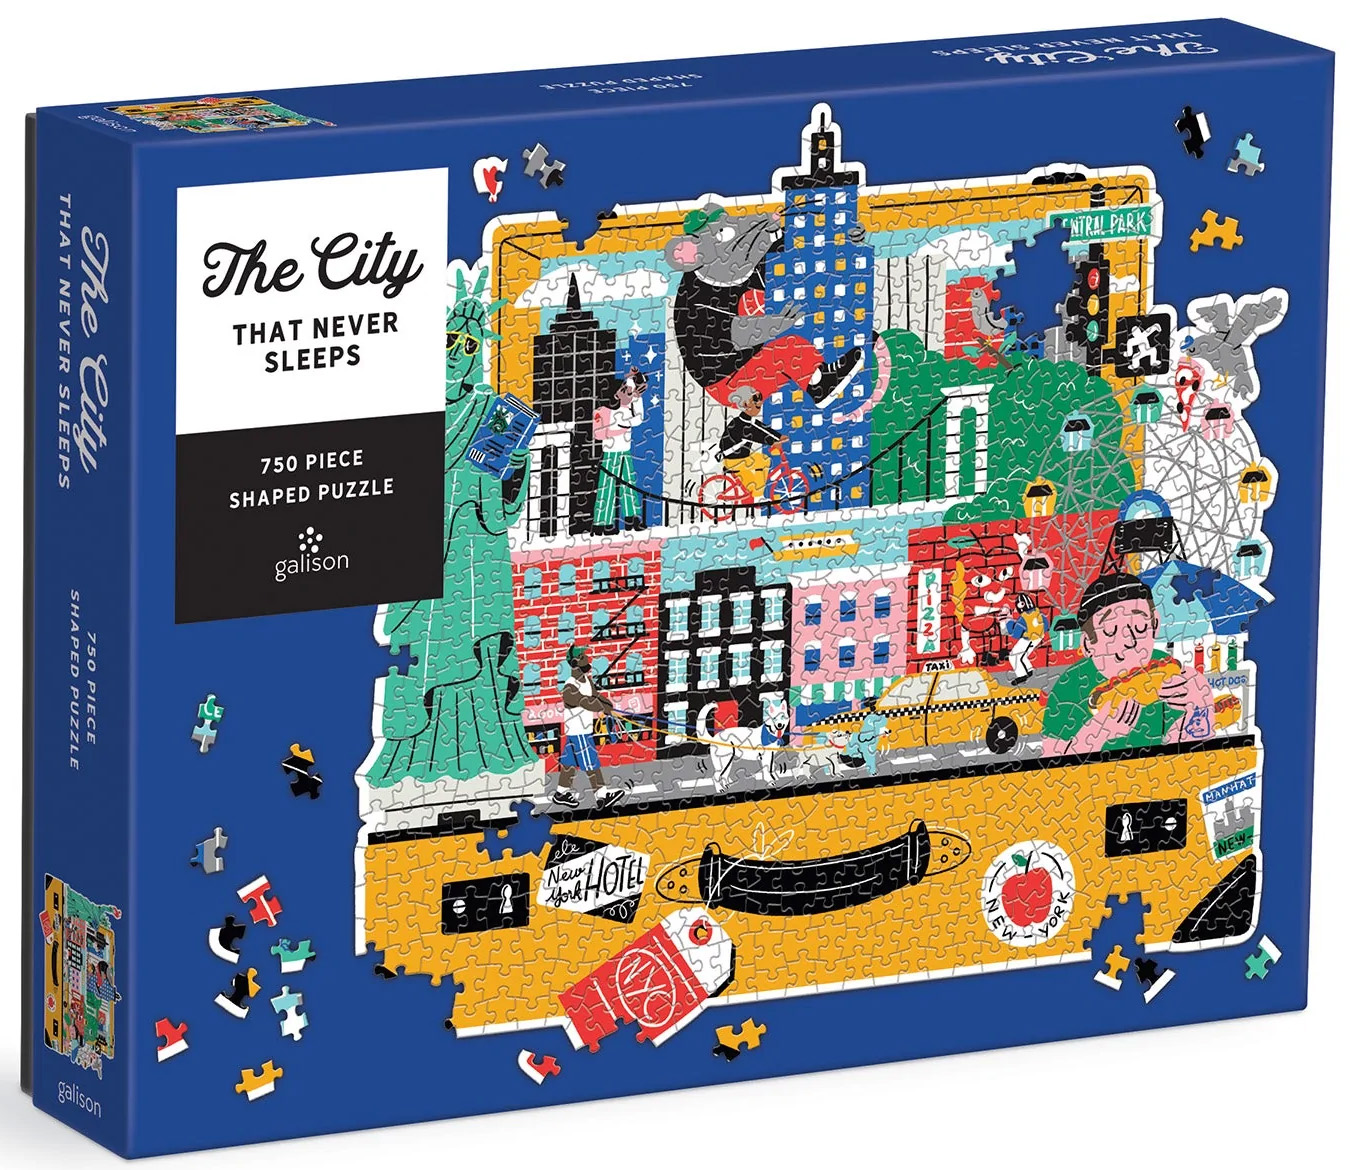 The City That Never Sleeps Shaped Puzzle